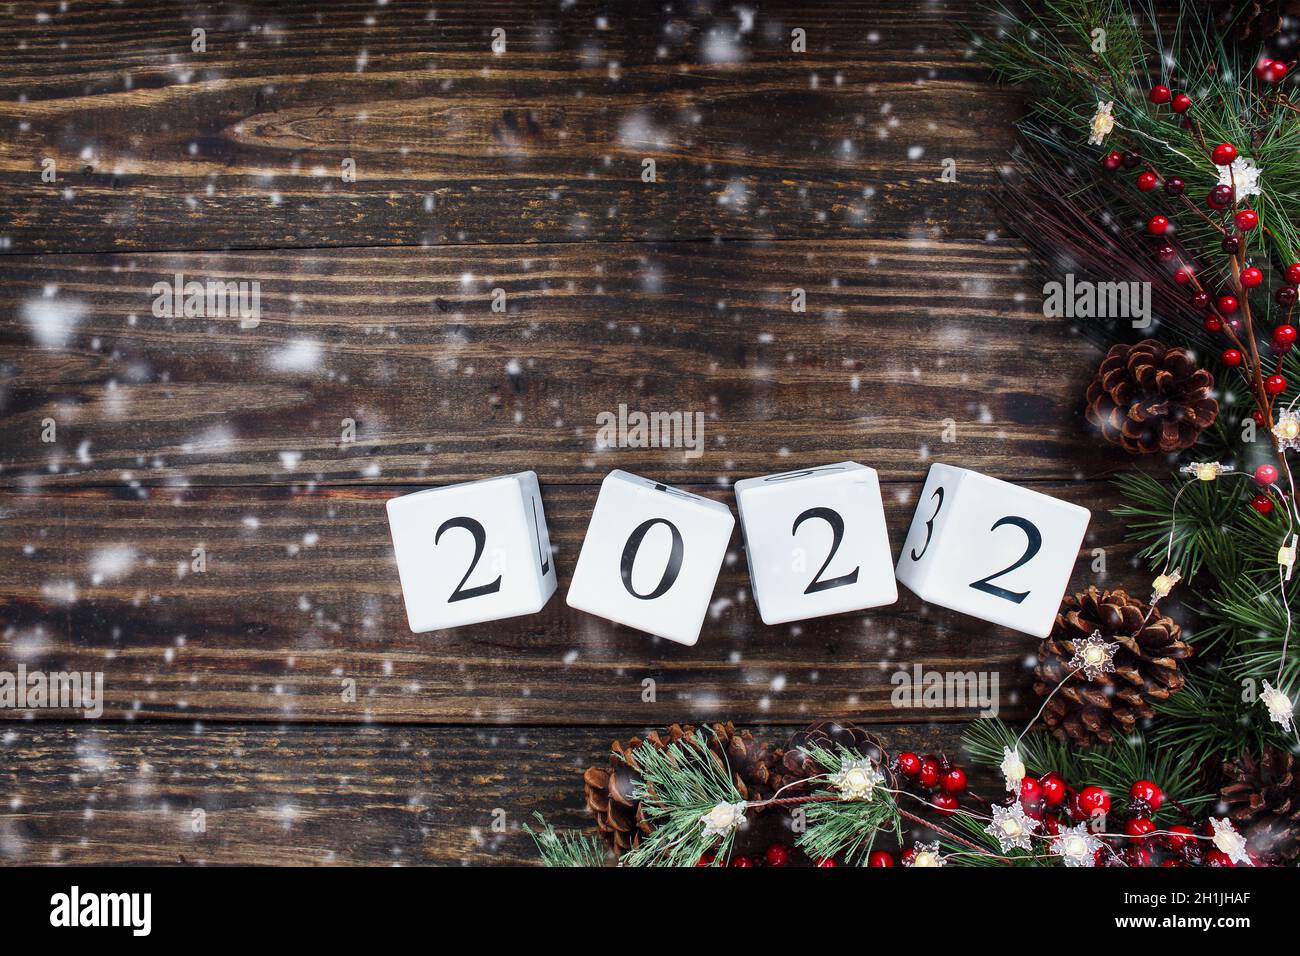 New Year's 2022 wood calendar blocks. Christmas tree lights, pine branches, red winter berries and snow. Top view with copy space available. Stock Photo